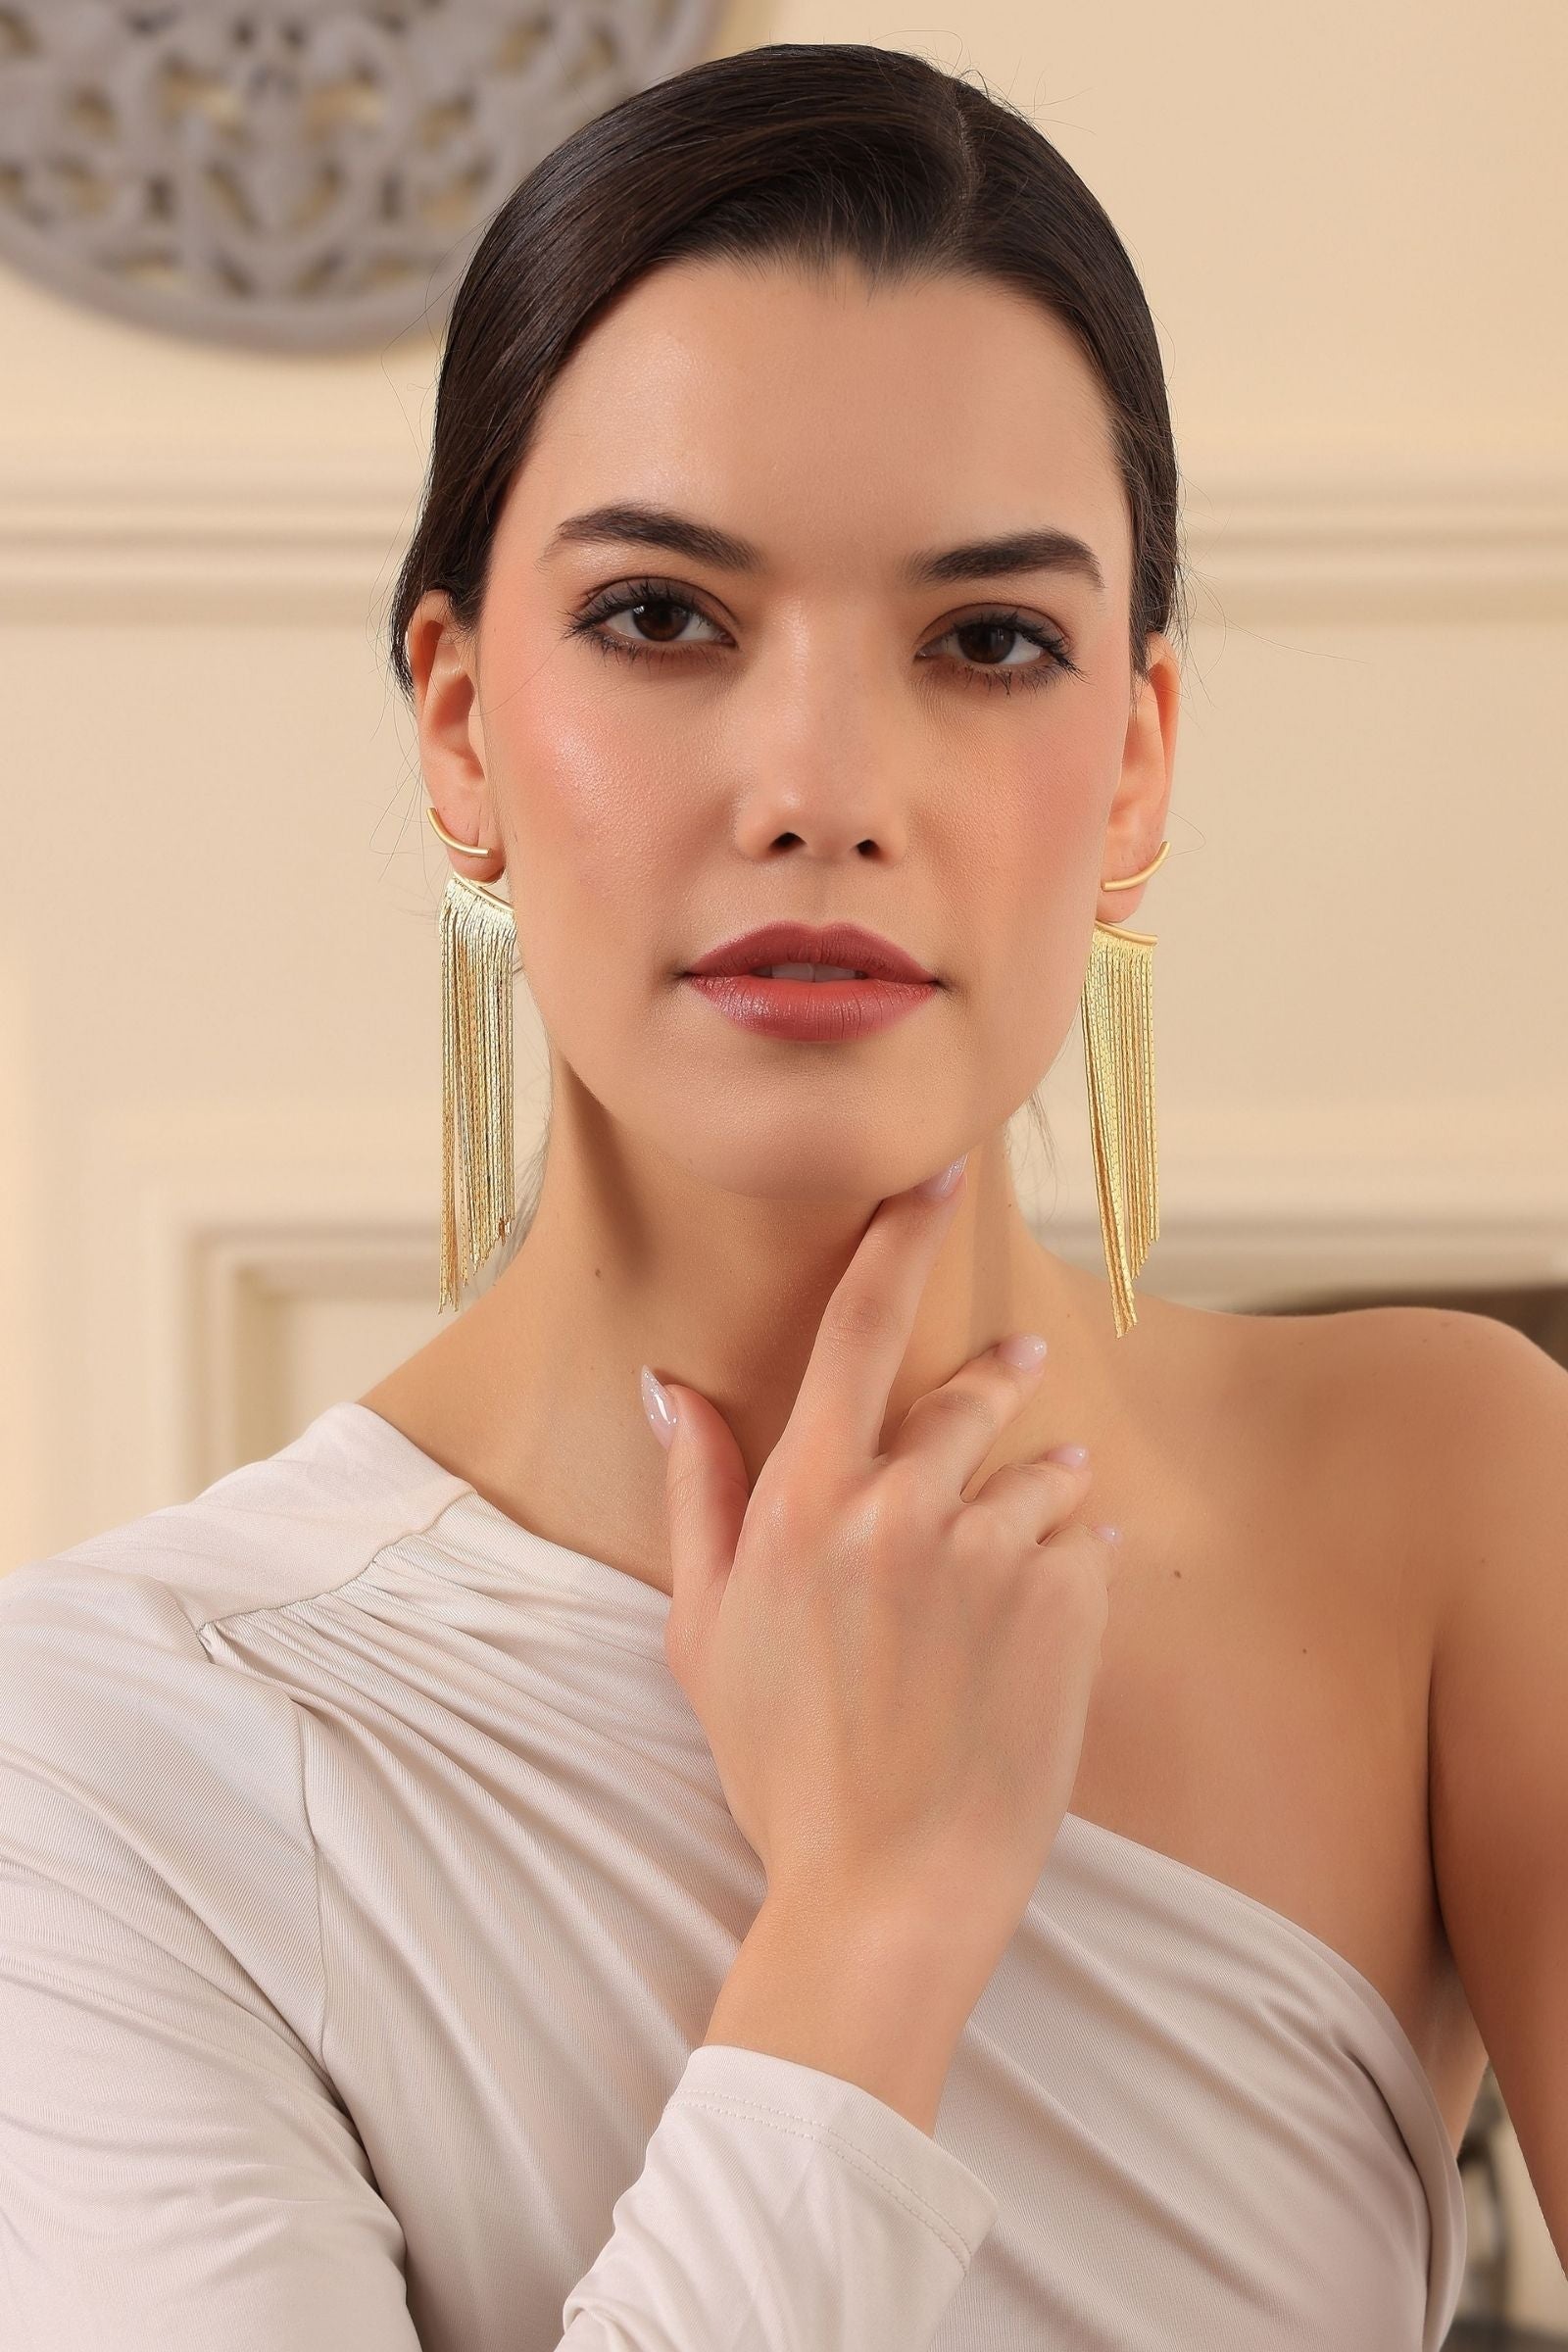 The Statement Collection-  Tassle Massle Earrings